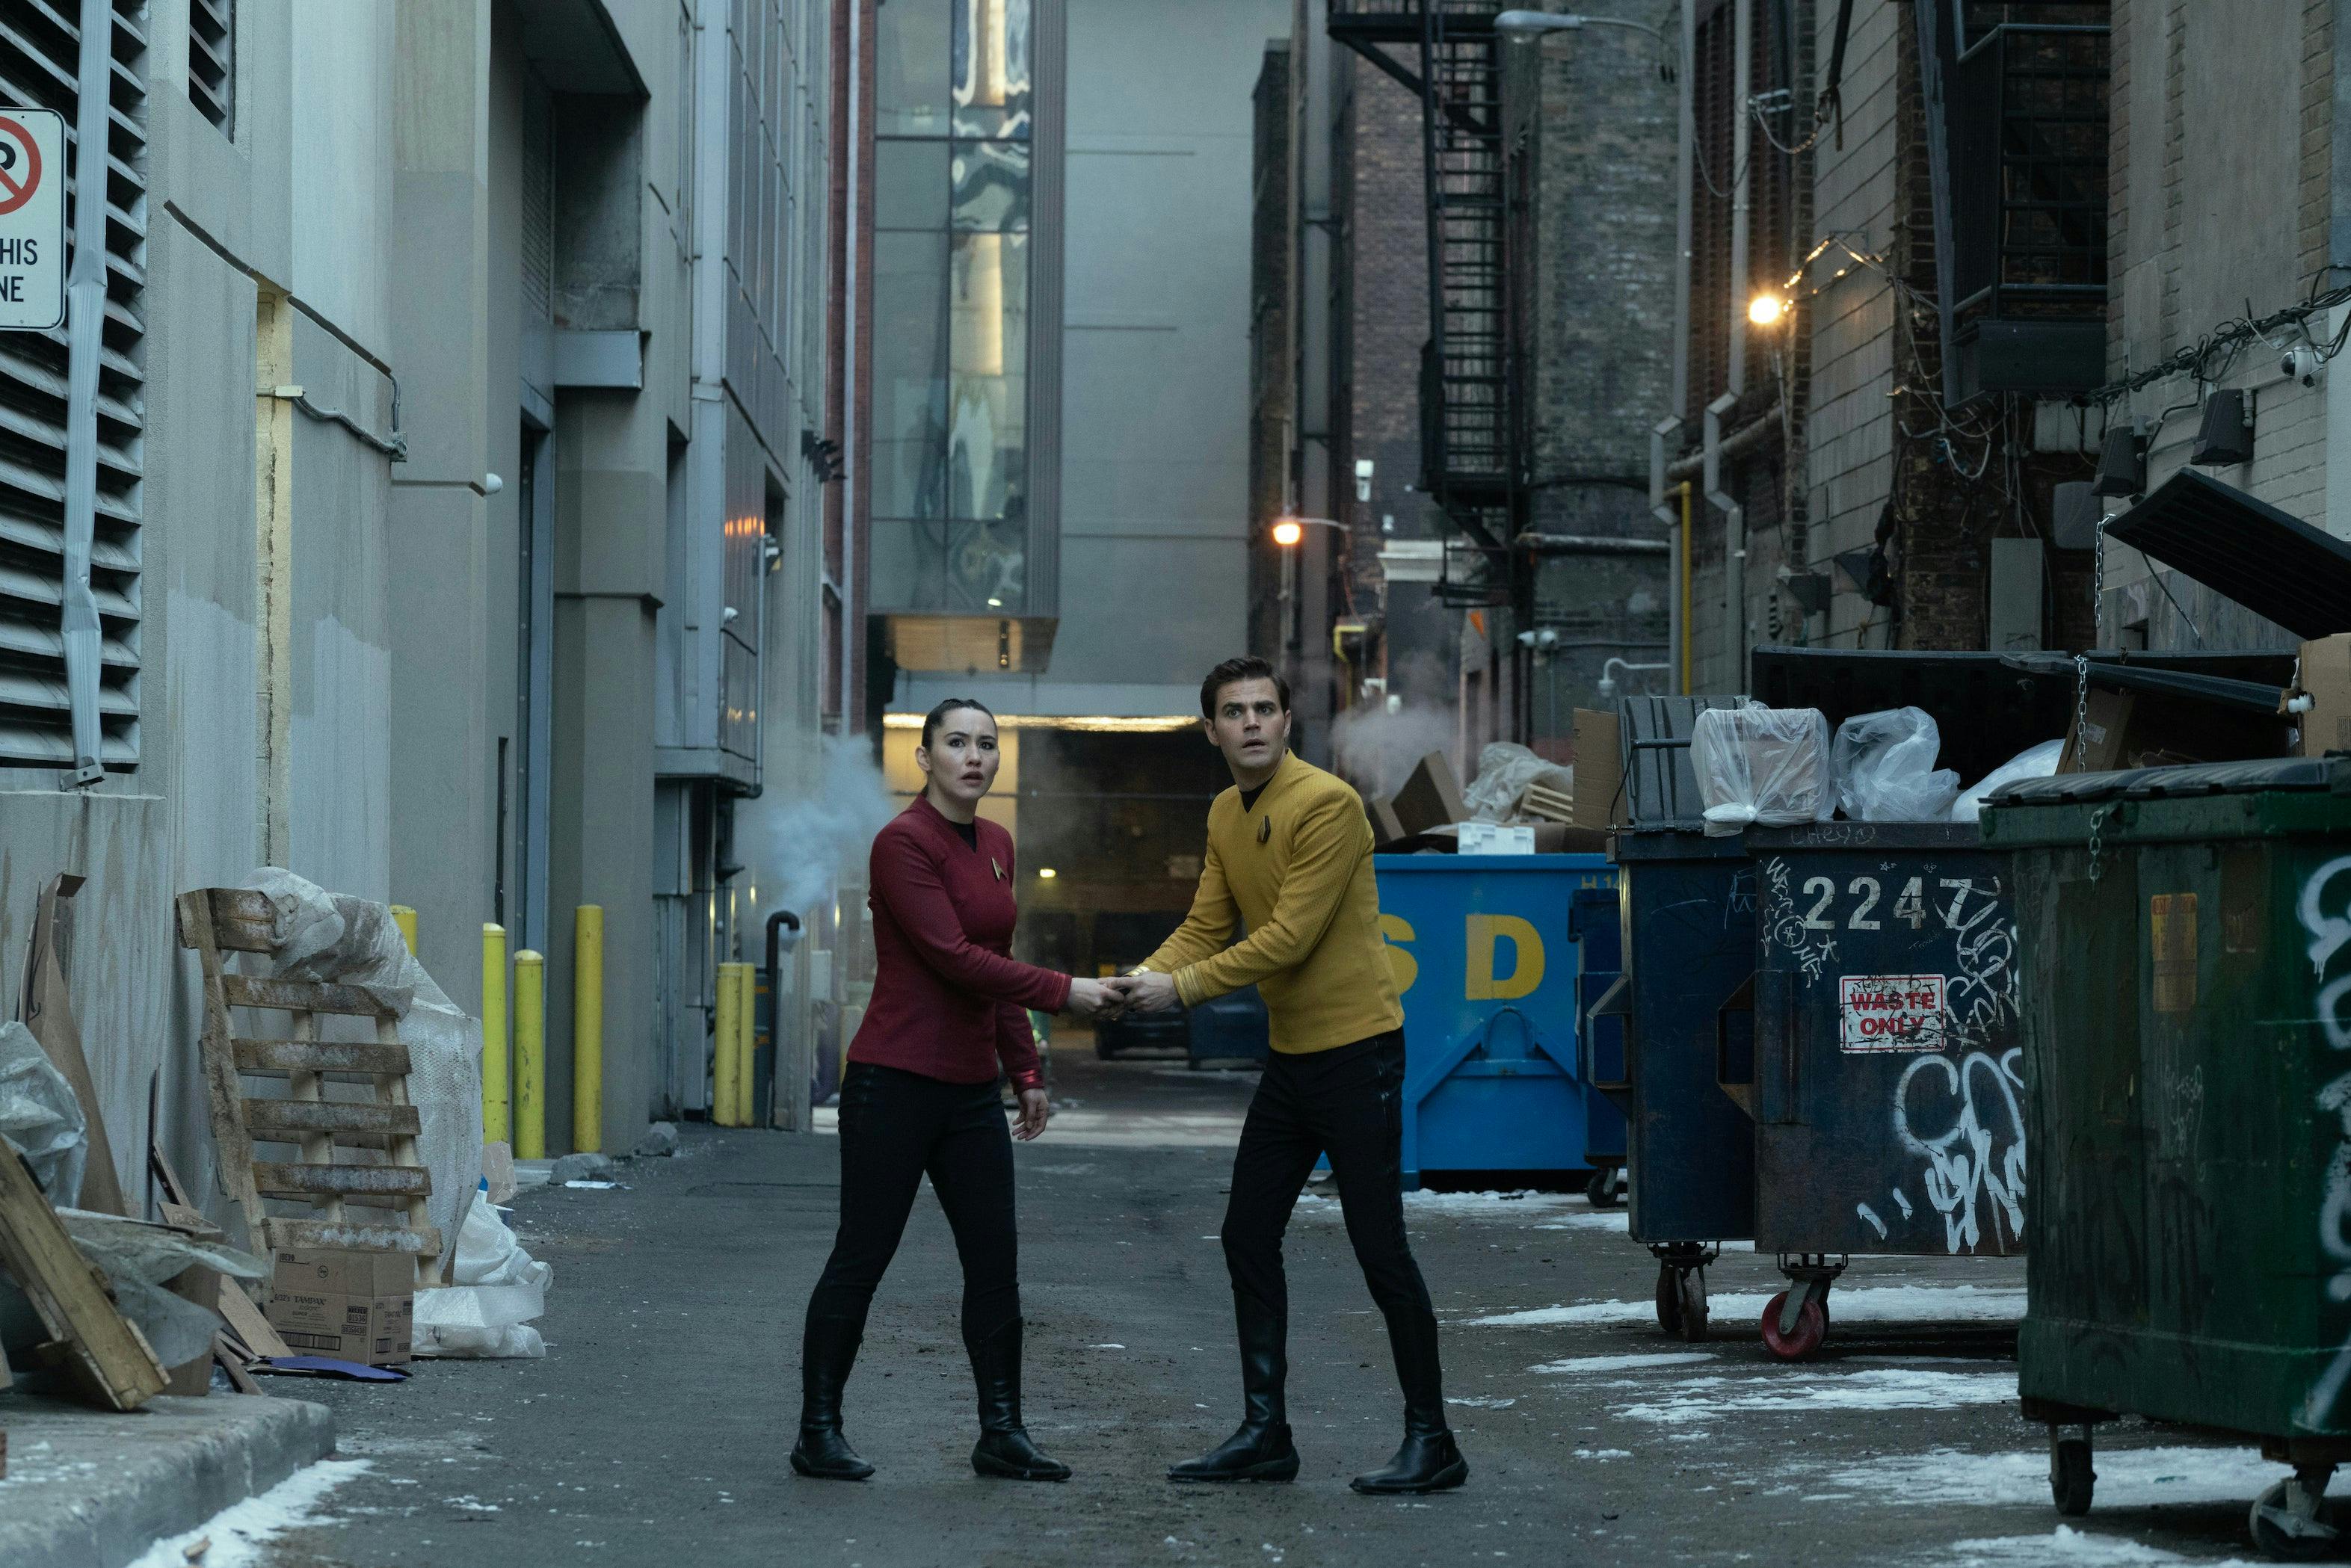 James Kirk and La'An both grip the same device in city alley near graffitied garbage bins in 'Tomorrow and Tomorrow and Tomorrow'